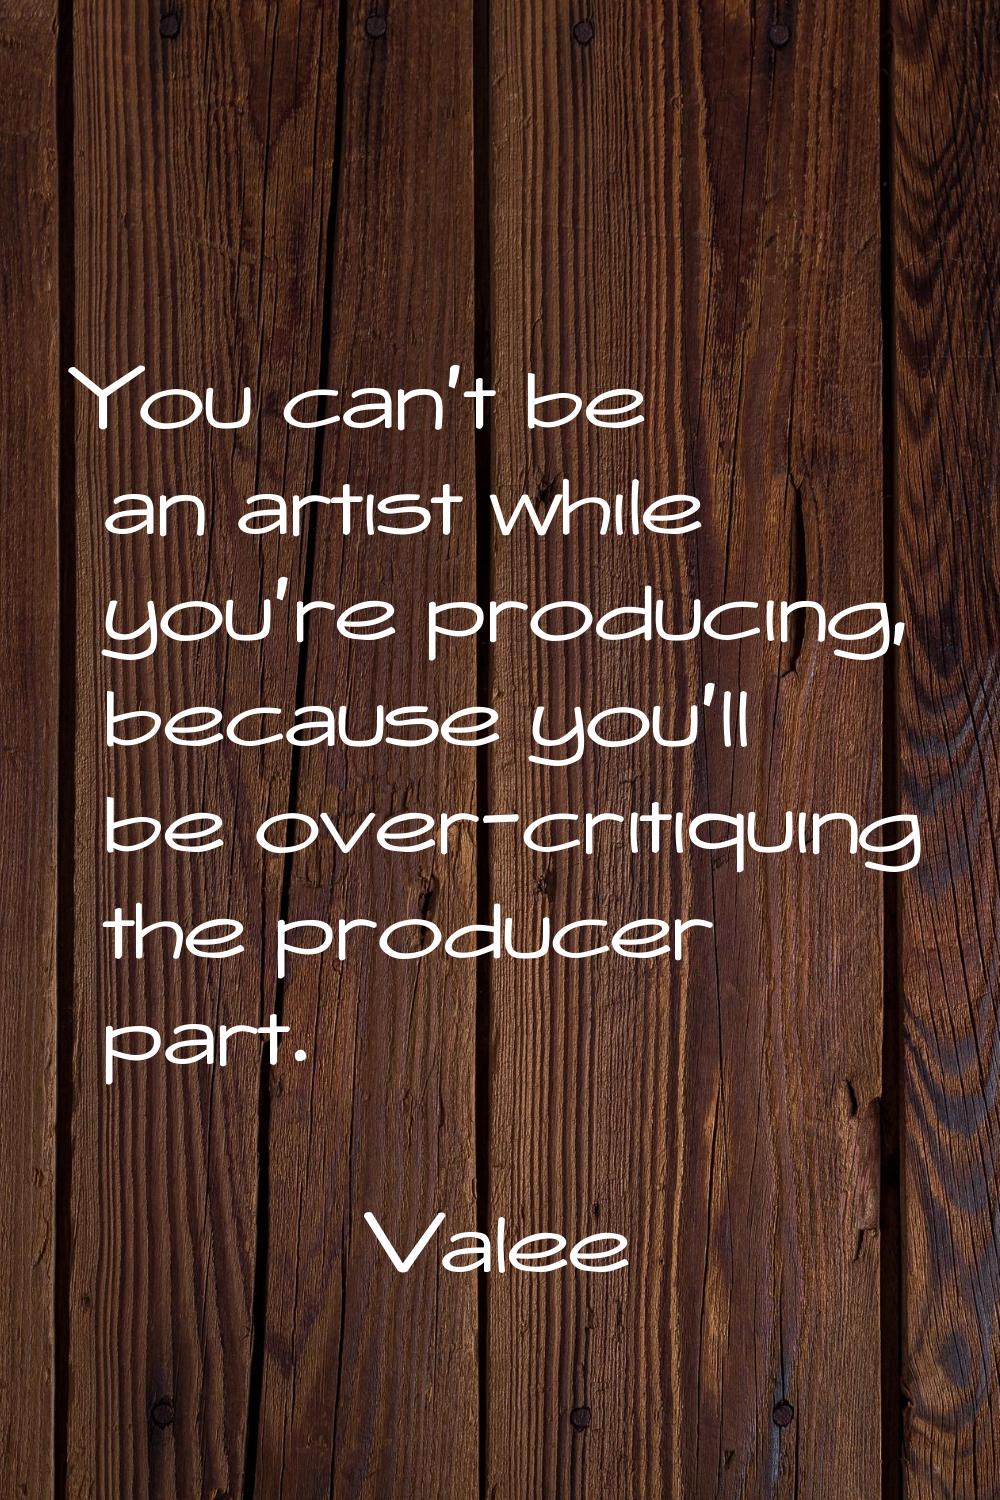 You can't be an artist while you're producing, because you'll be over-critiquing the producer part.